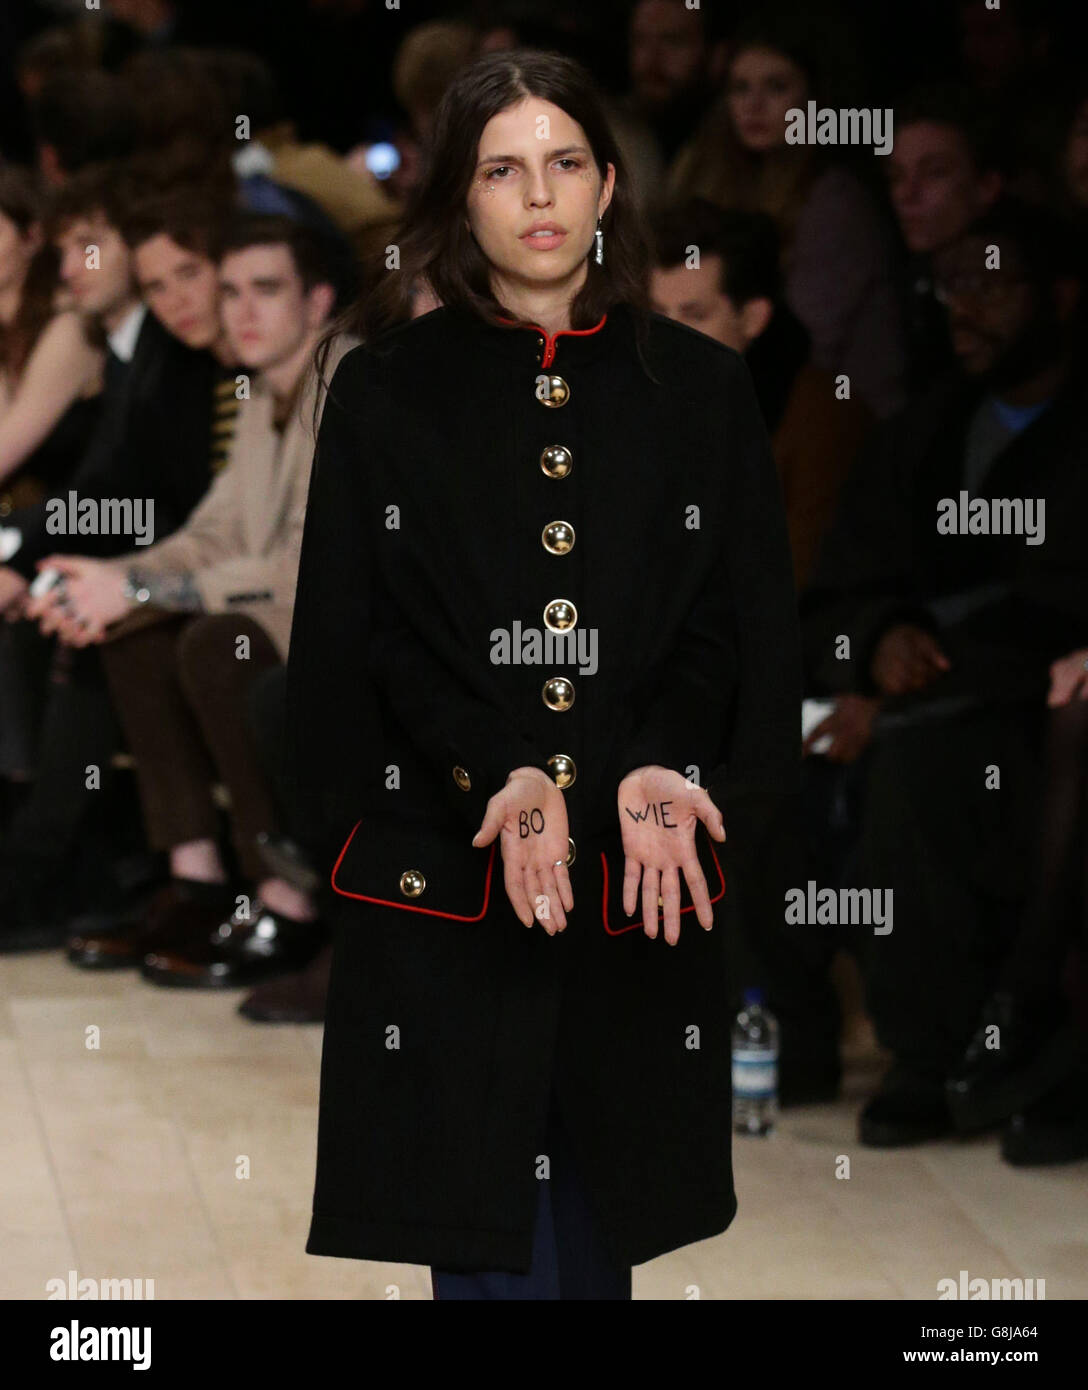 A model with a David Bowie tribute on the catwalk the Burberry Prorsum London Collections Men AW2016 show at Kensington Gardens, Kensington London Stock Photo - Alamy